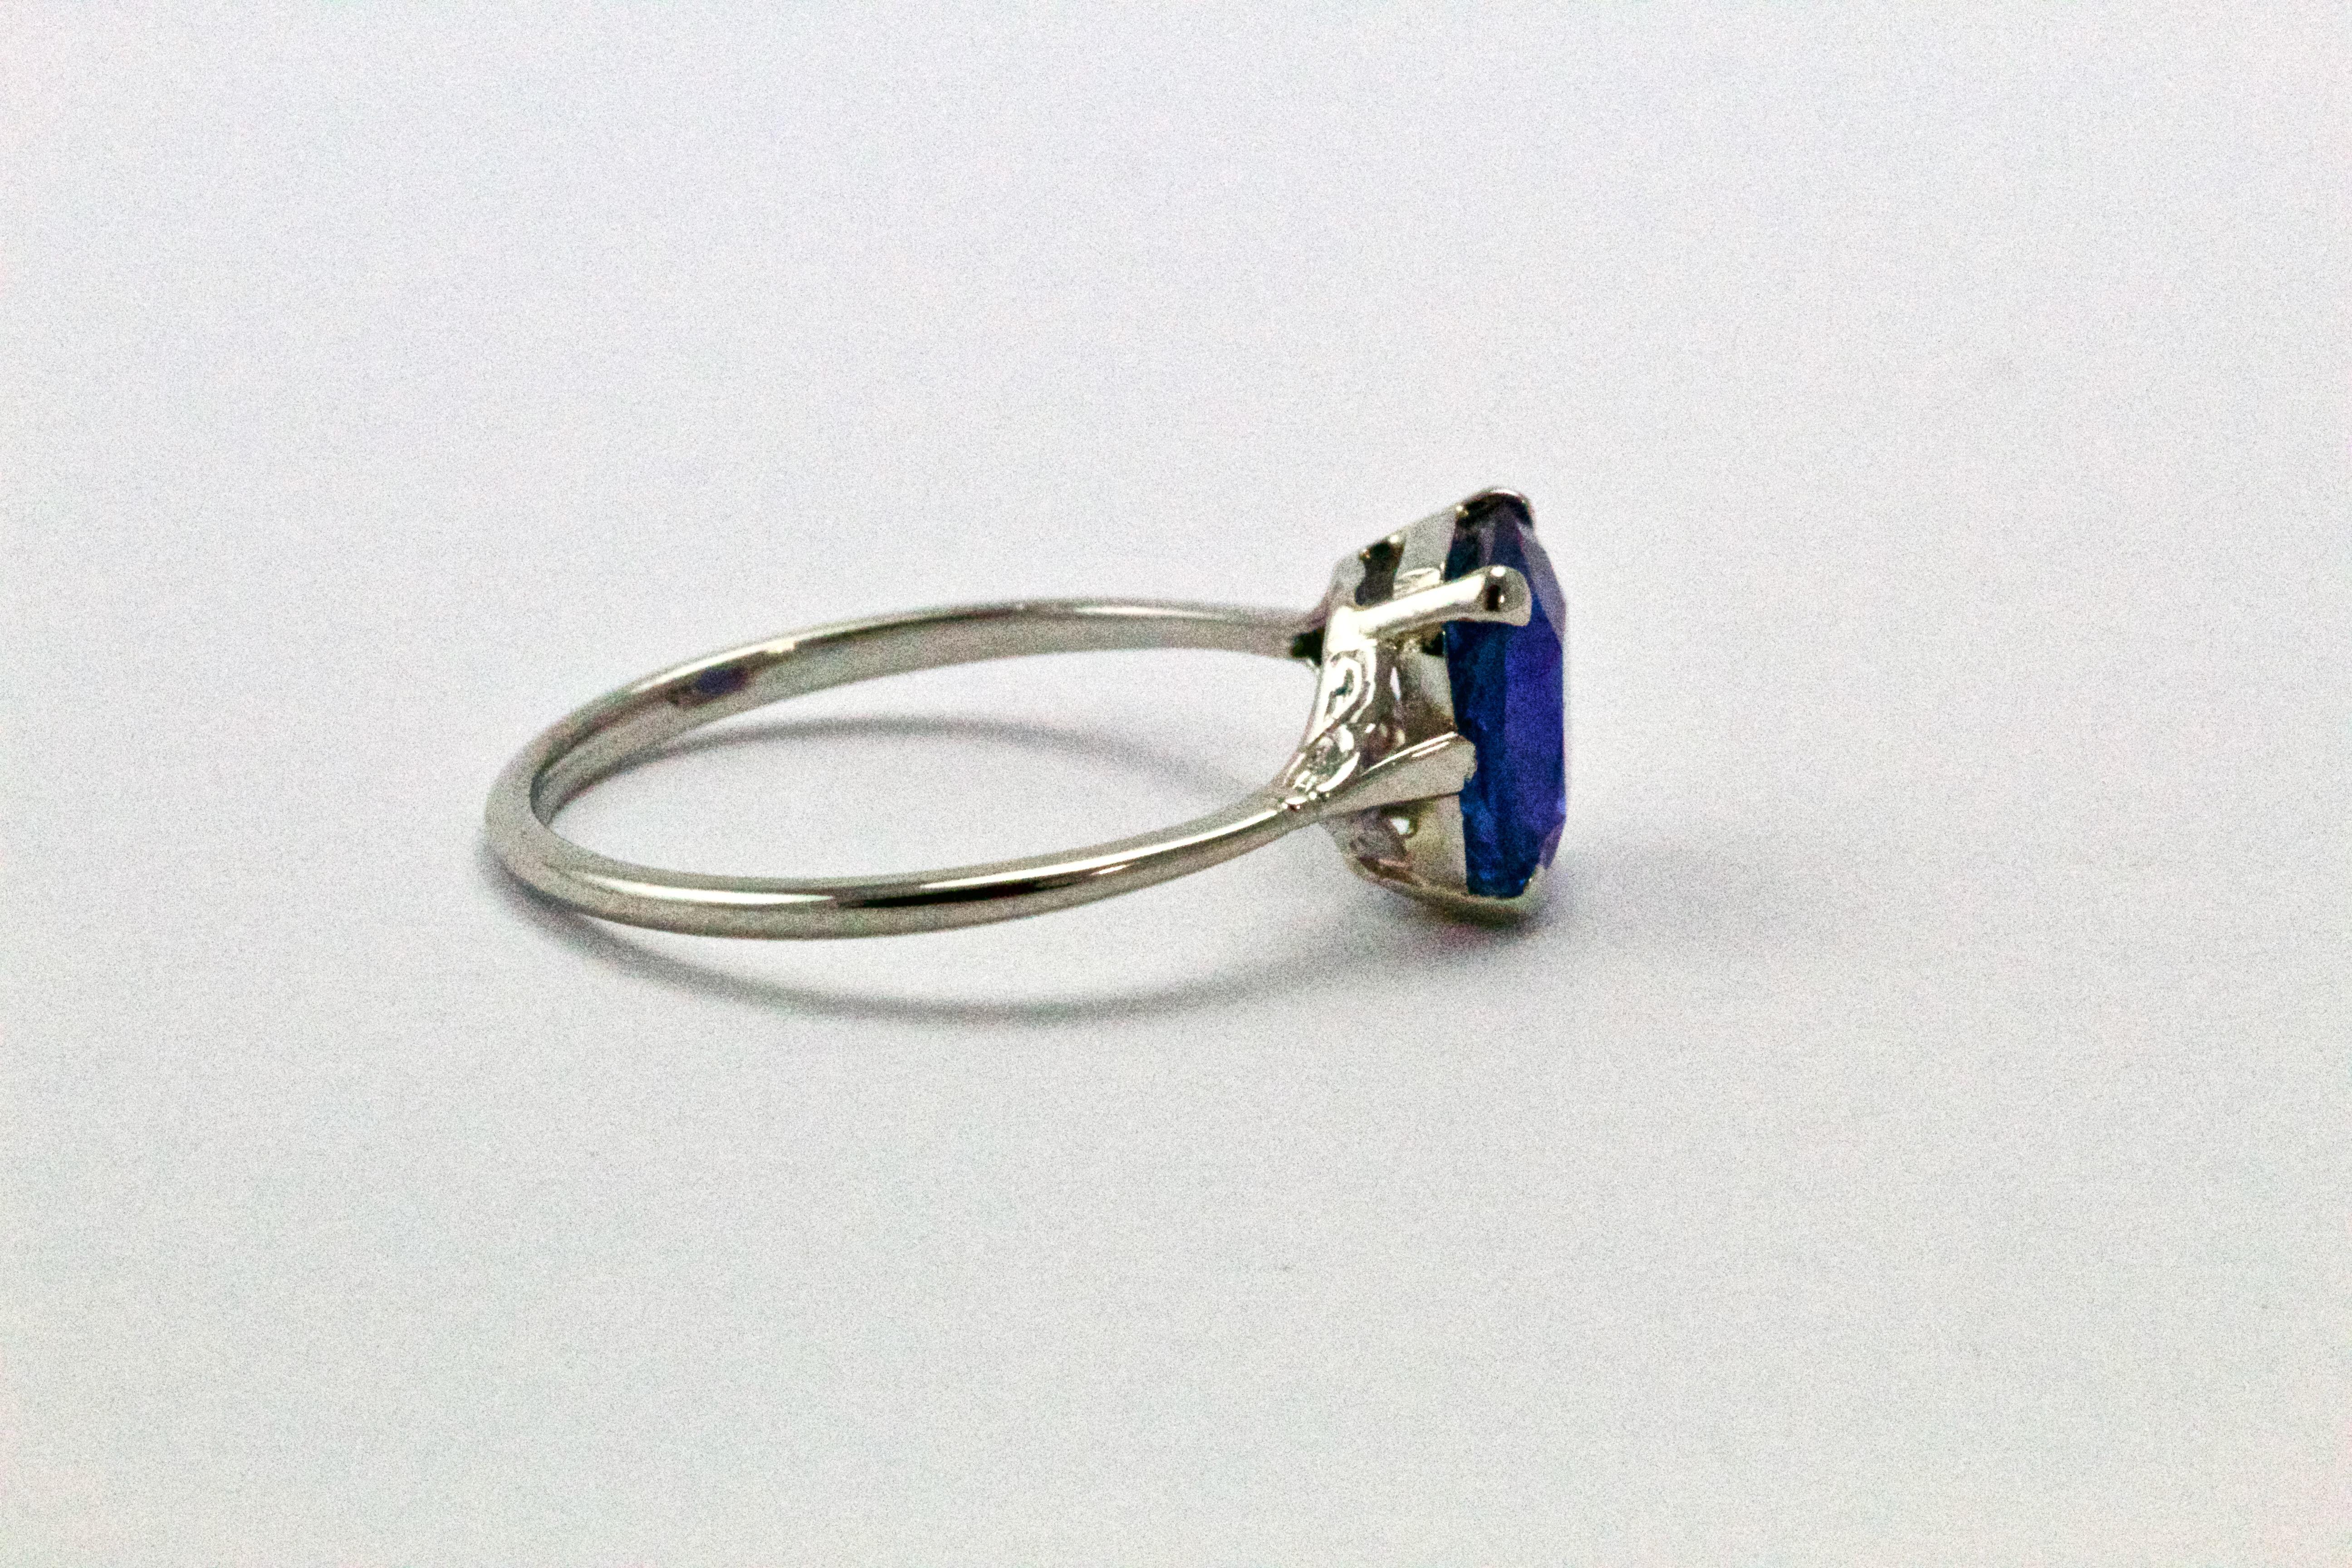 A simply stunning natural cornflower blue sapphire set in a beautiful platinum setting with delicate split shoulders.
1.35 carat stone with stunning powder blue colour and good clarity. 
Ring Size : k 1/2 or 5 1/2